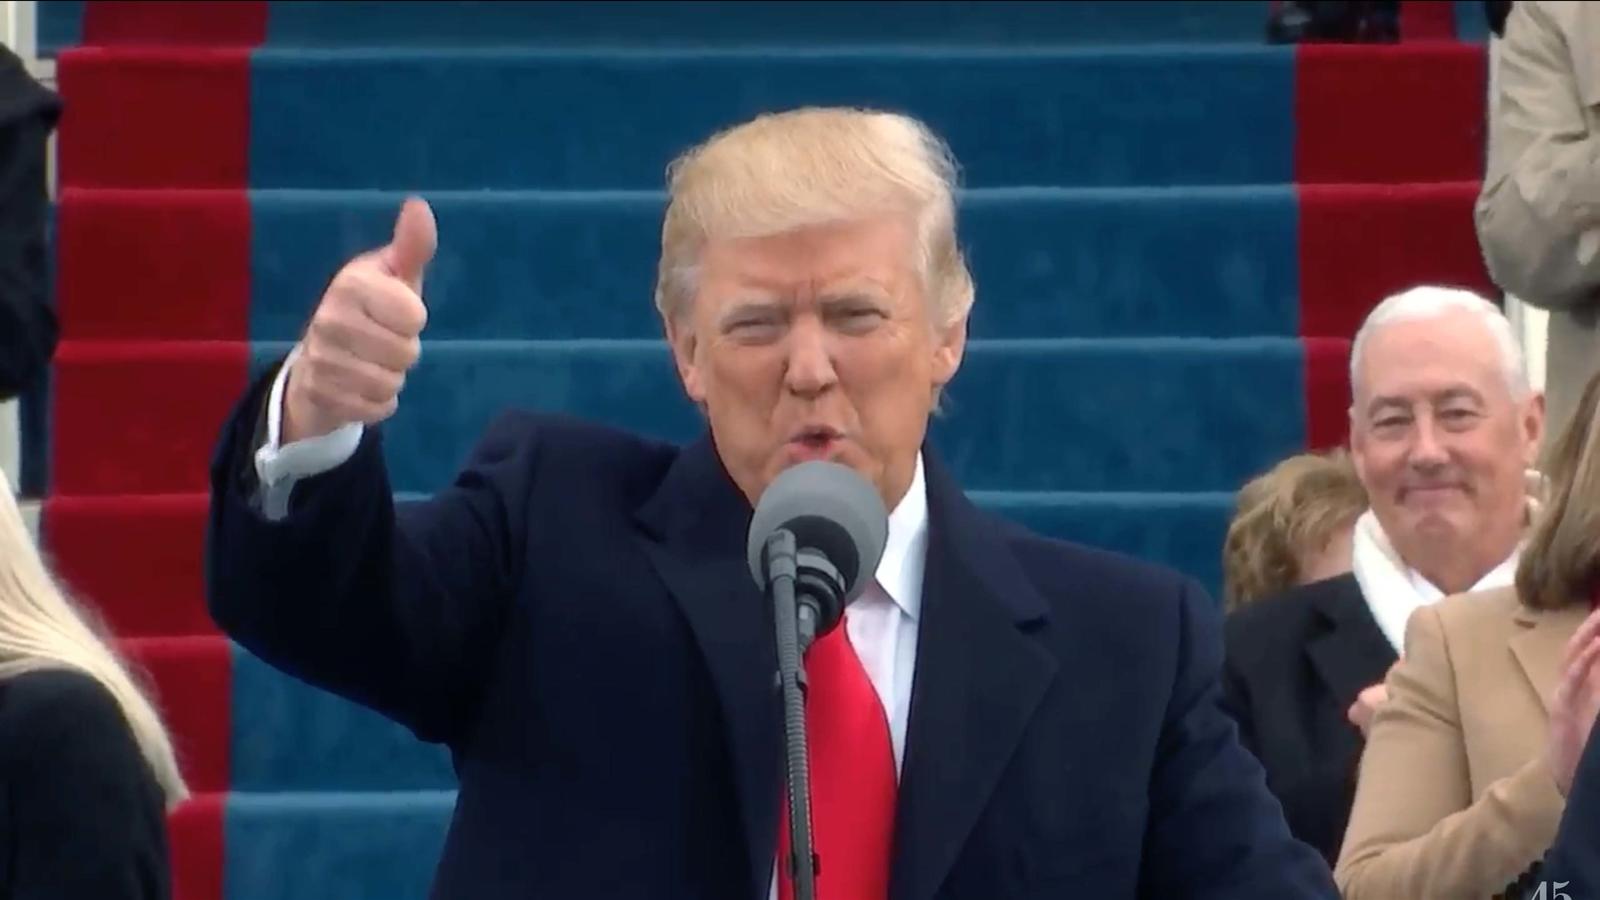 Trump takes the oath of office and steps forward as the 45th President to make his inaugural speech